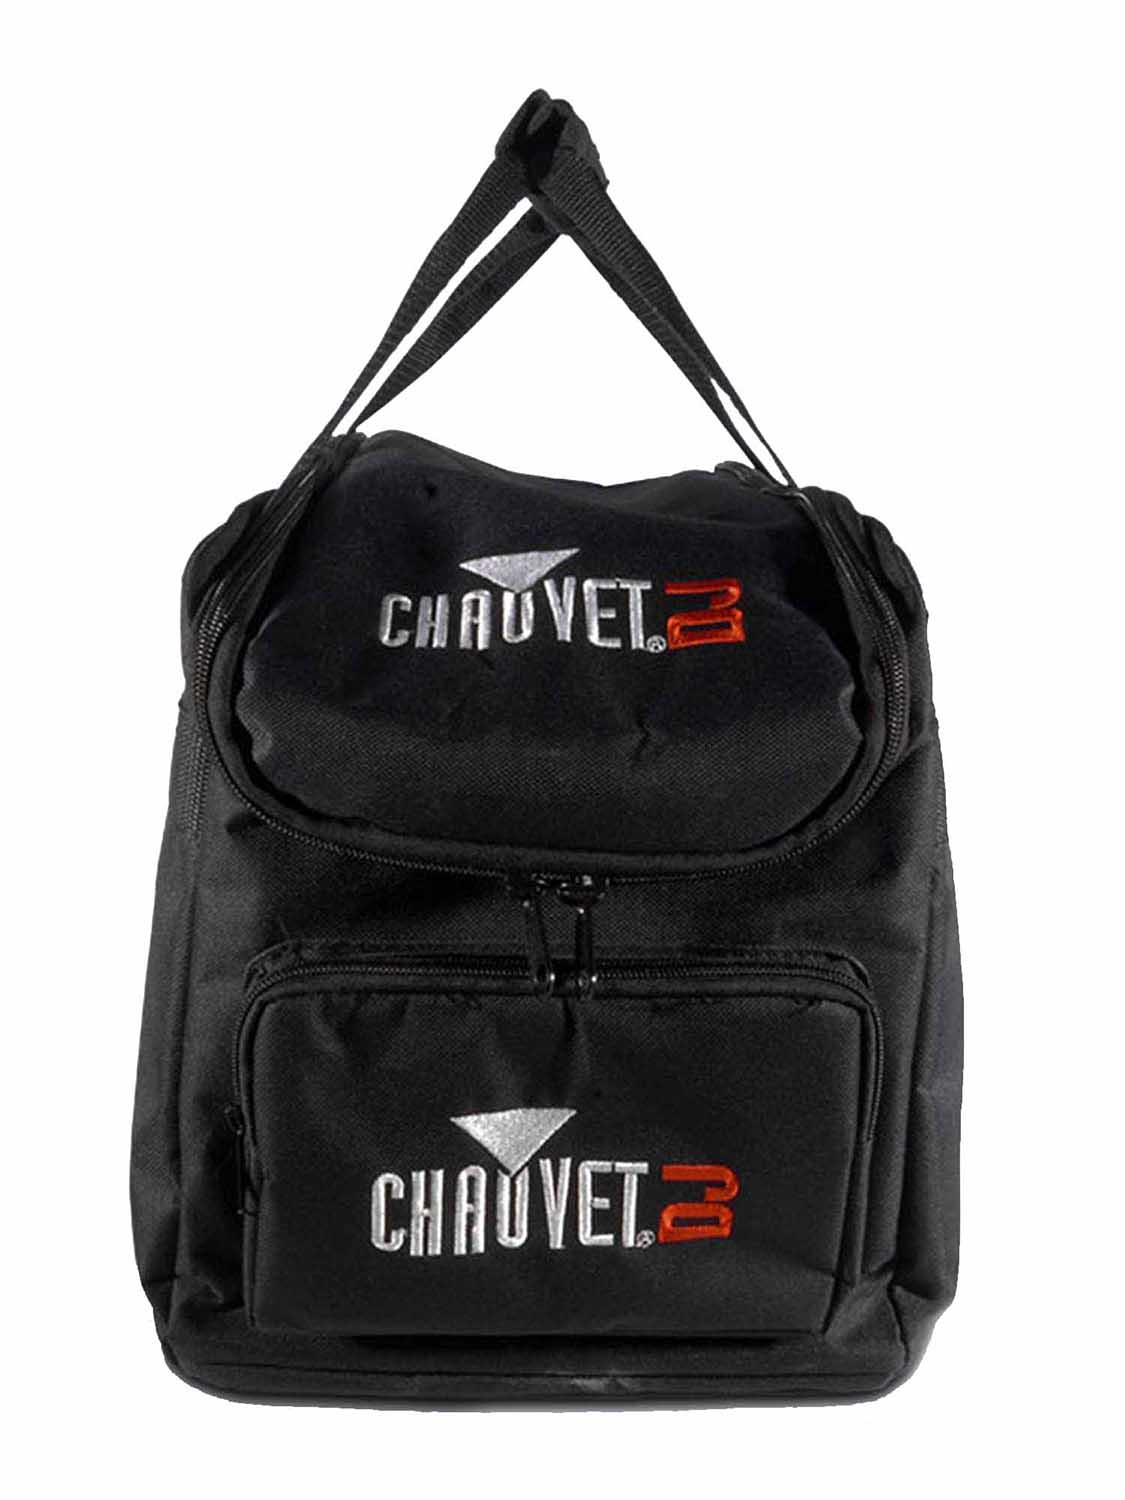 Chauvet DJ Package with Intimidator Scan 360 LED Scanner and CHS-30 VIP Gear Bag - Hollywood DJ